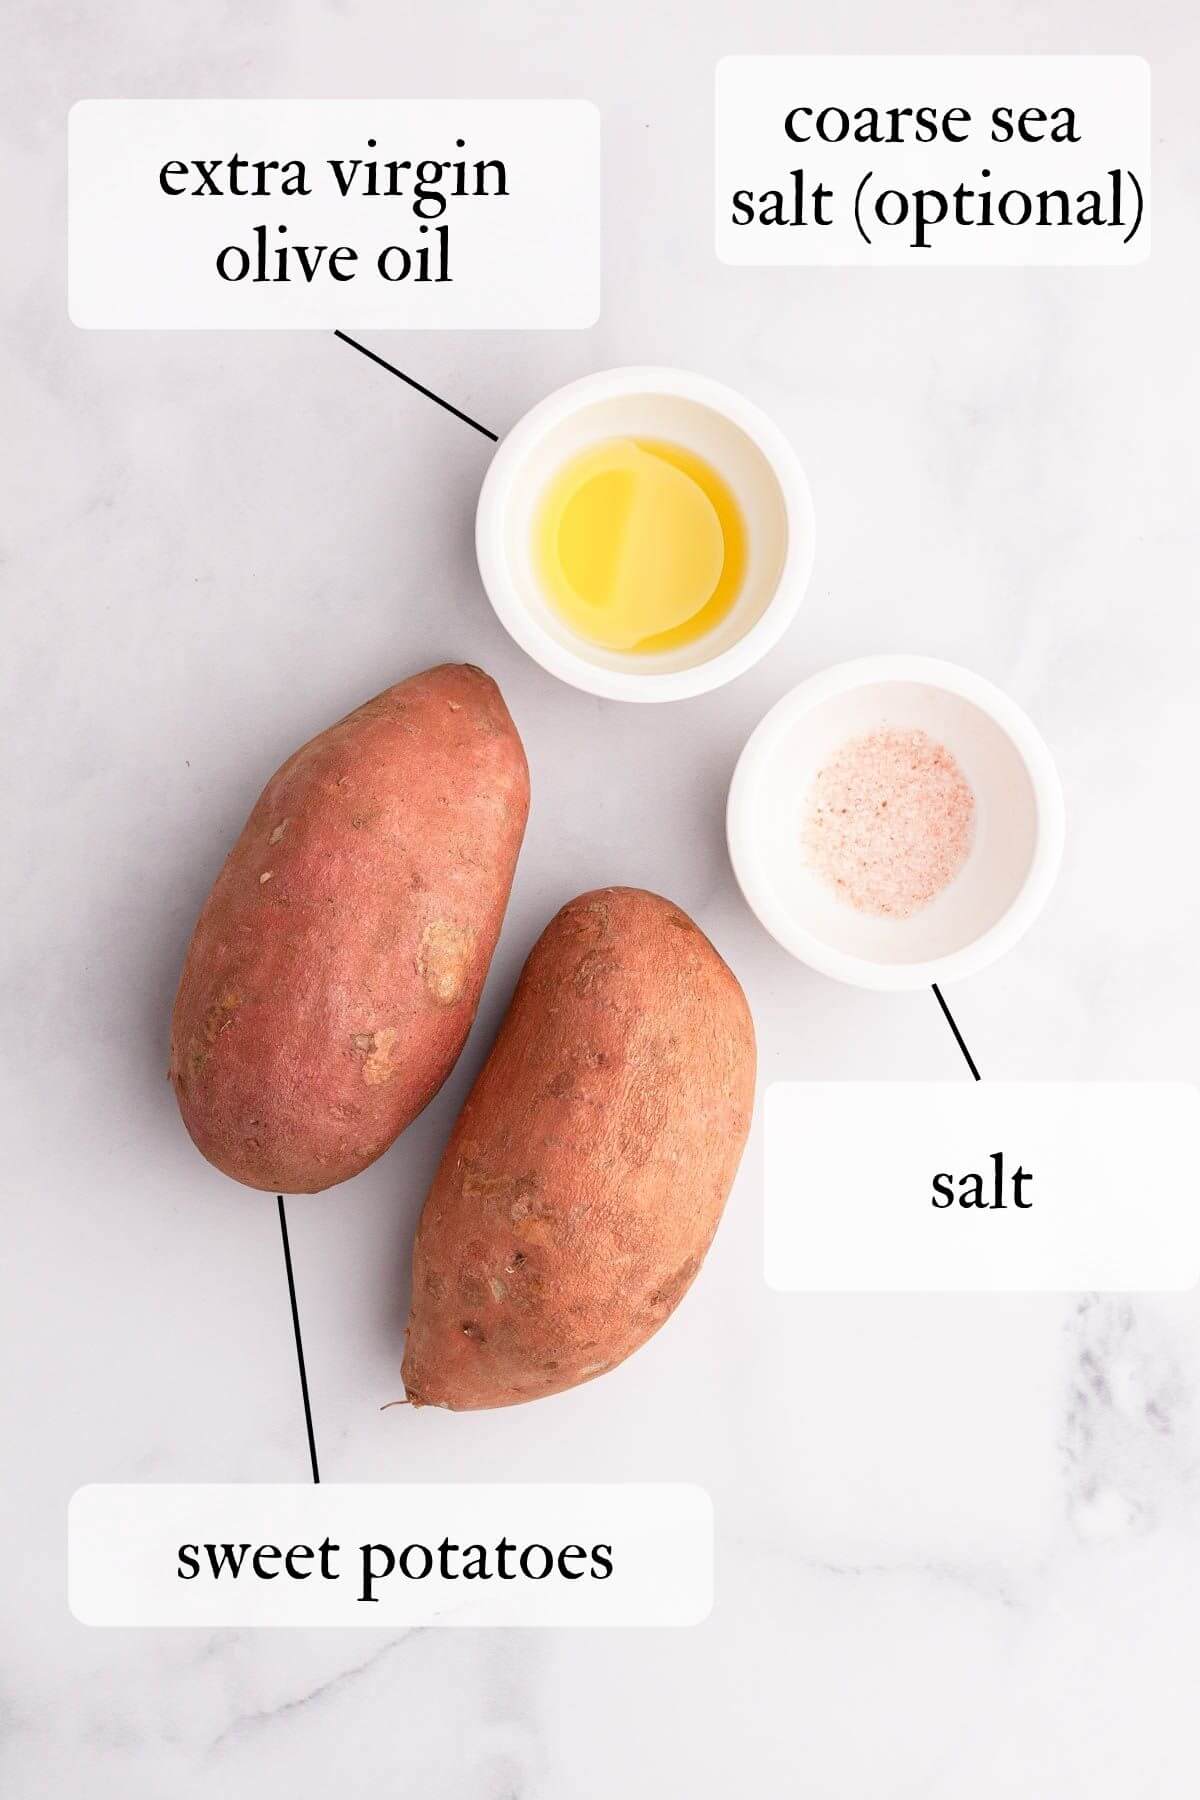 images of sweet potatoes, olive oil, and salt on counter with their names labeled